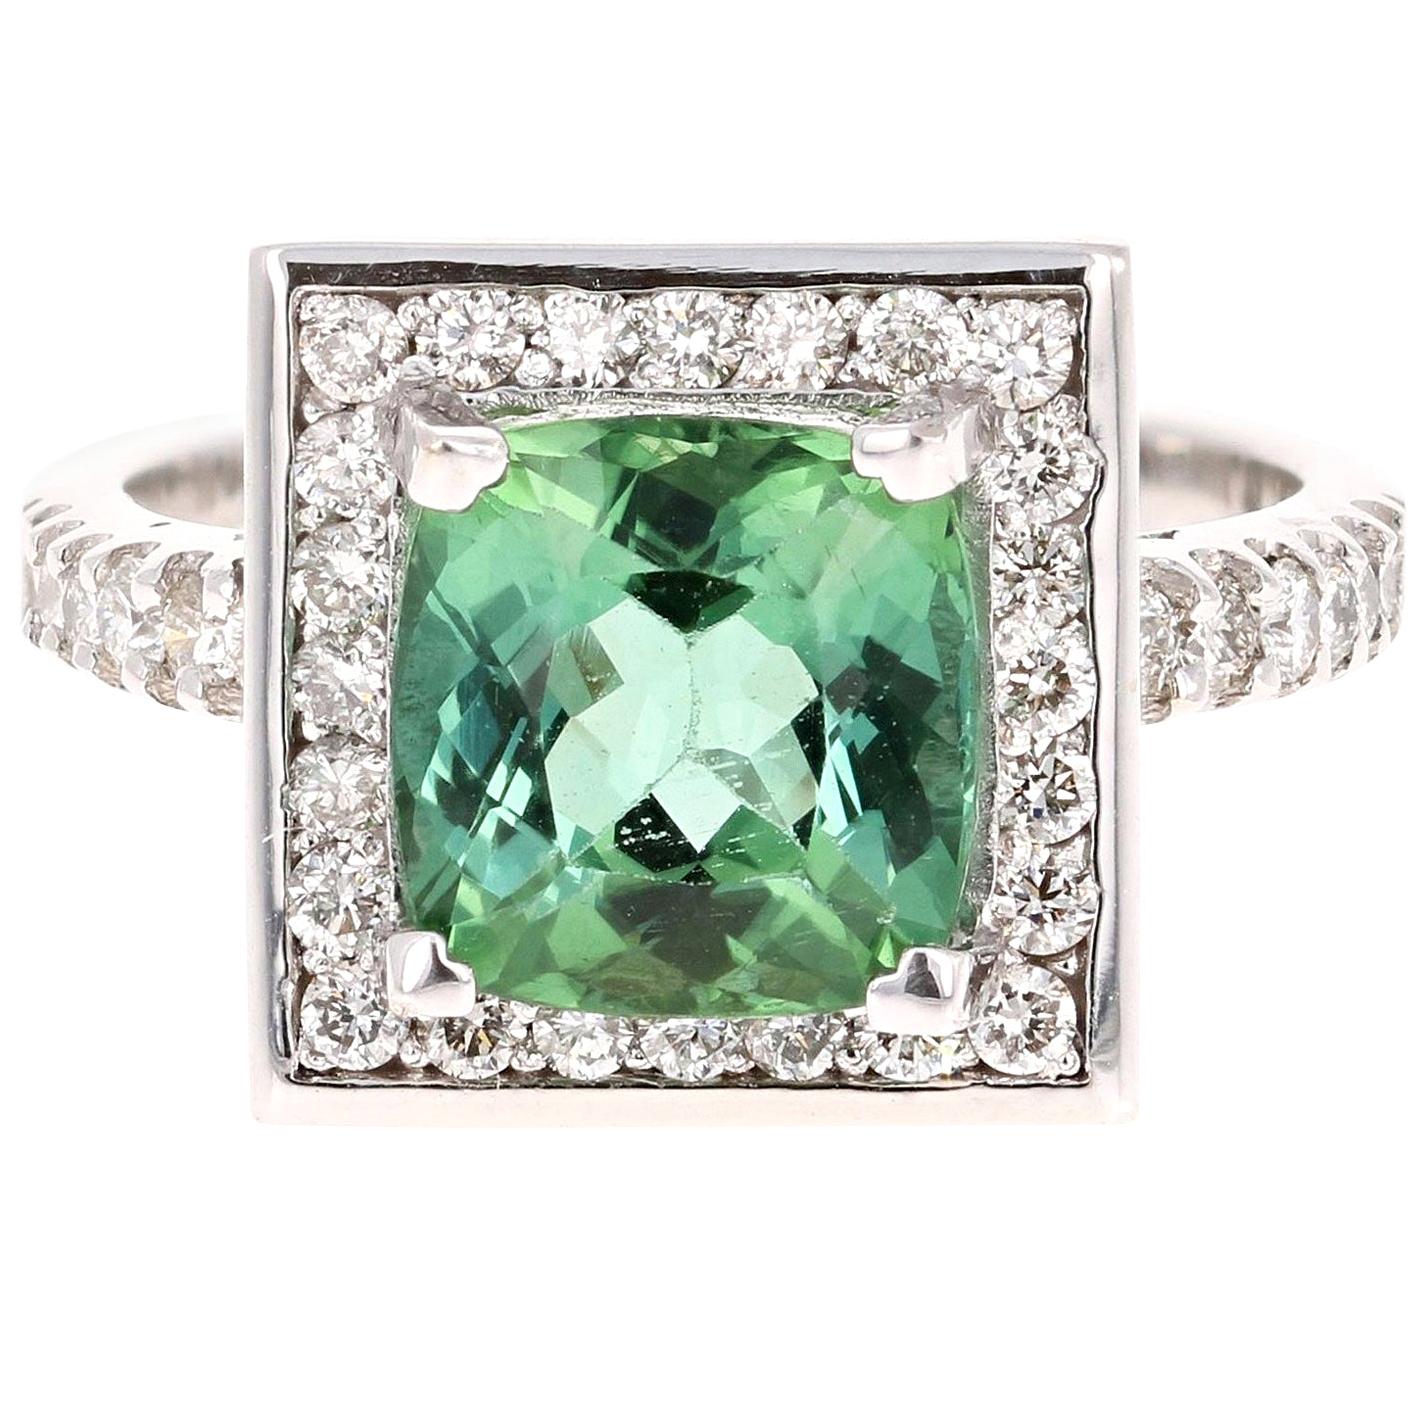 3.81 Carat Green Tourmaline Diamond White Gold Cocktail Ring For Sale